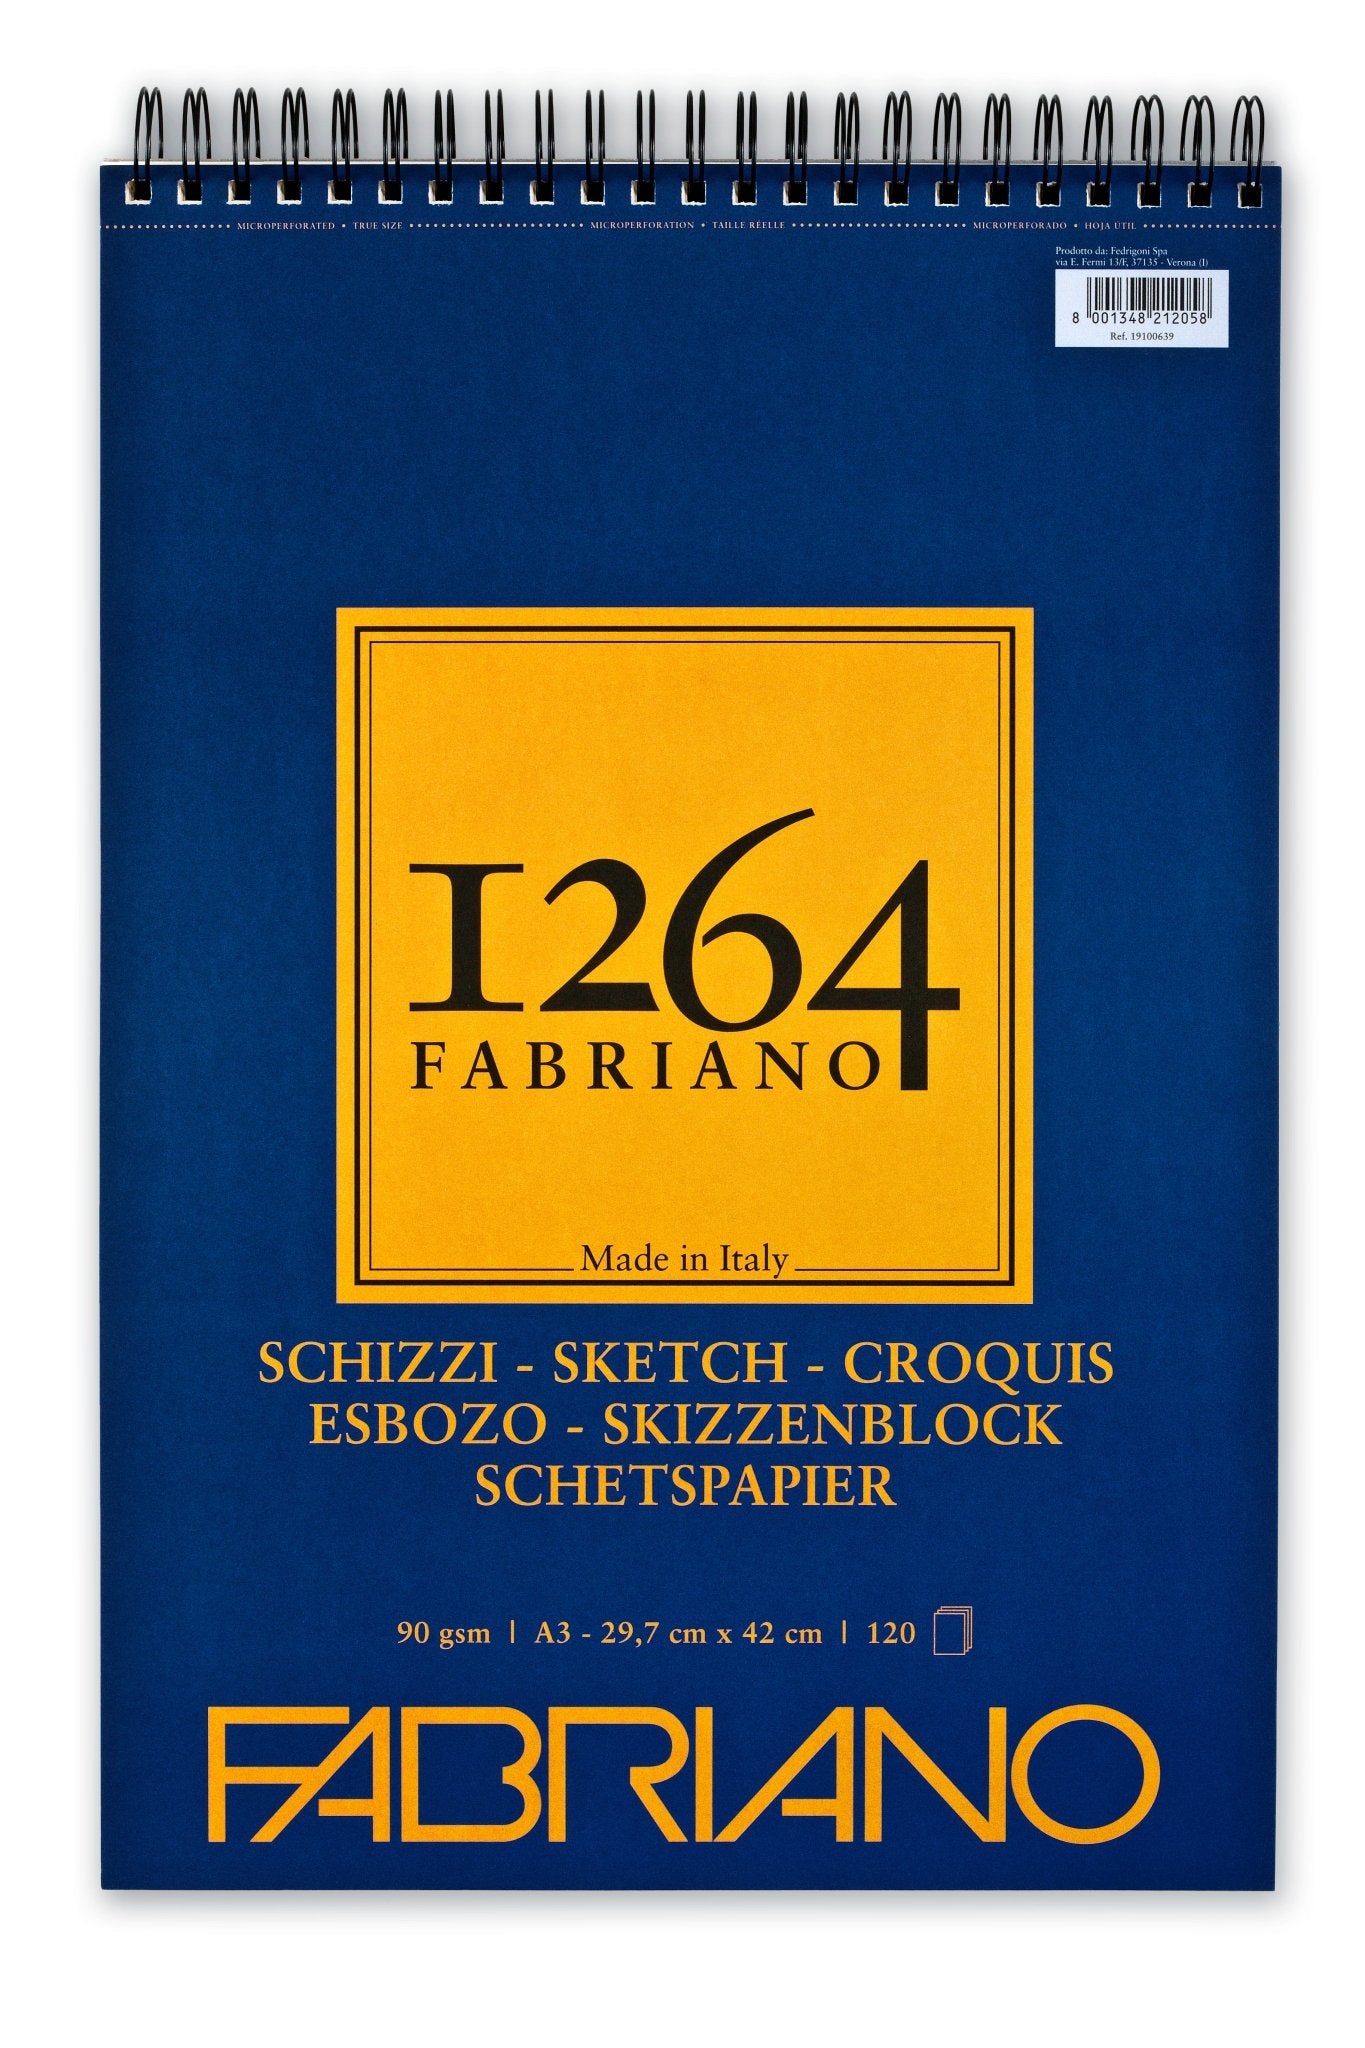 Fabriano 1264 Sketch Pad 90gsm A3 120 Shts Spiral (Short Side) –